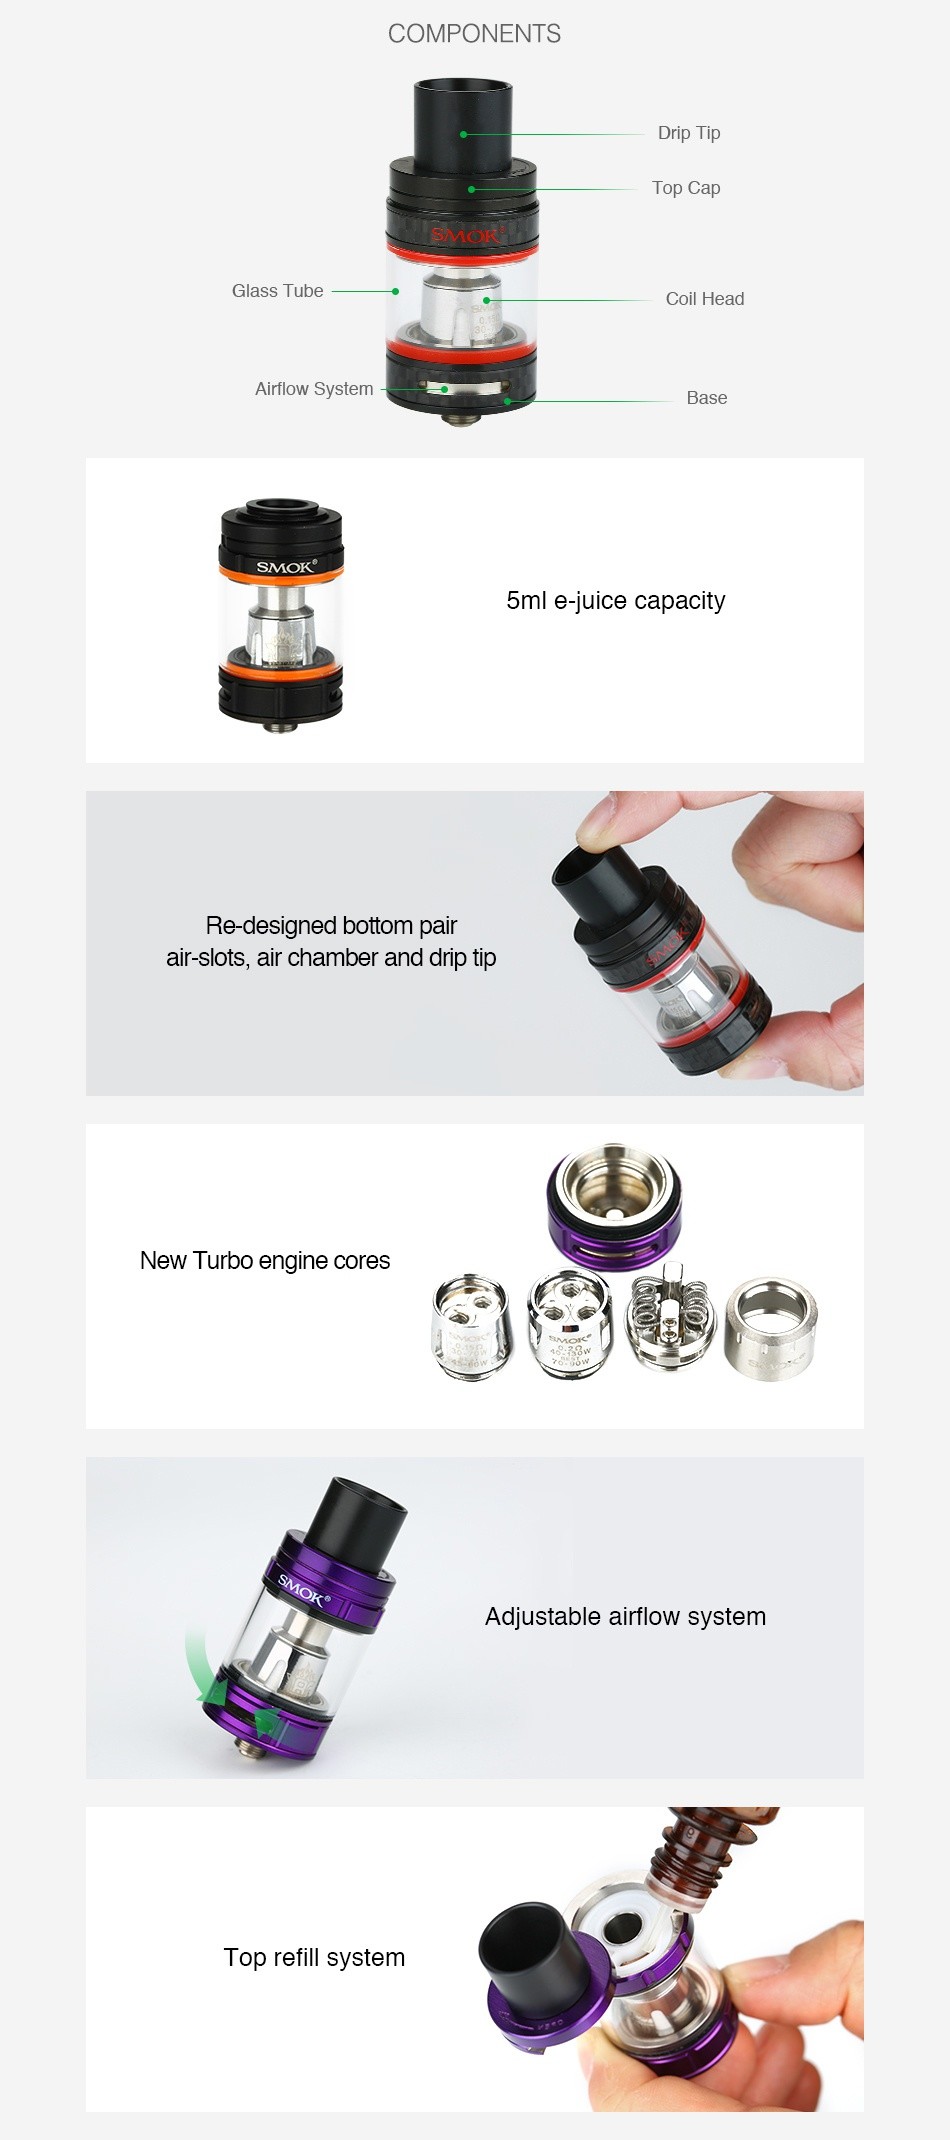 SMOK TFV8 Big Baby Beast Tank 5ml/2ml COMPONENTS Drip Ti G  ass Tube  Coil Head Airflow System SMOK 5ml e juice capacit Re designed bottom pair slots air chamber and drip tip New Turbo engine cores Adjustable airflow system Top refill system